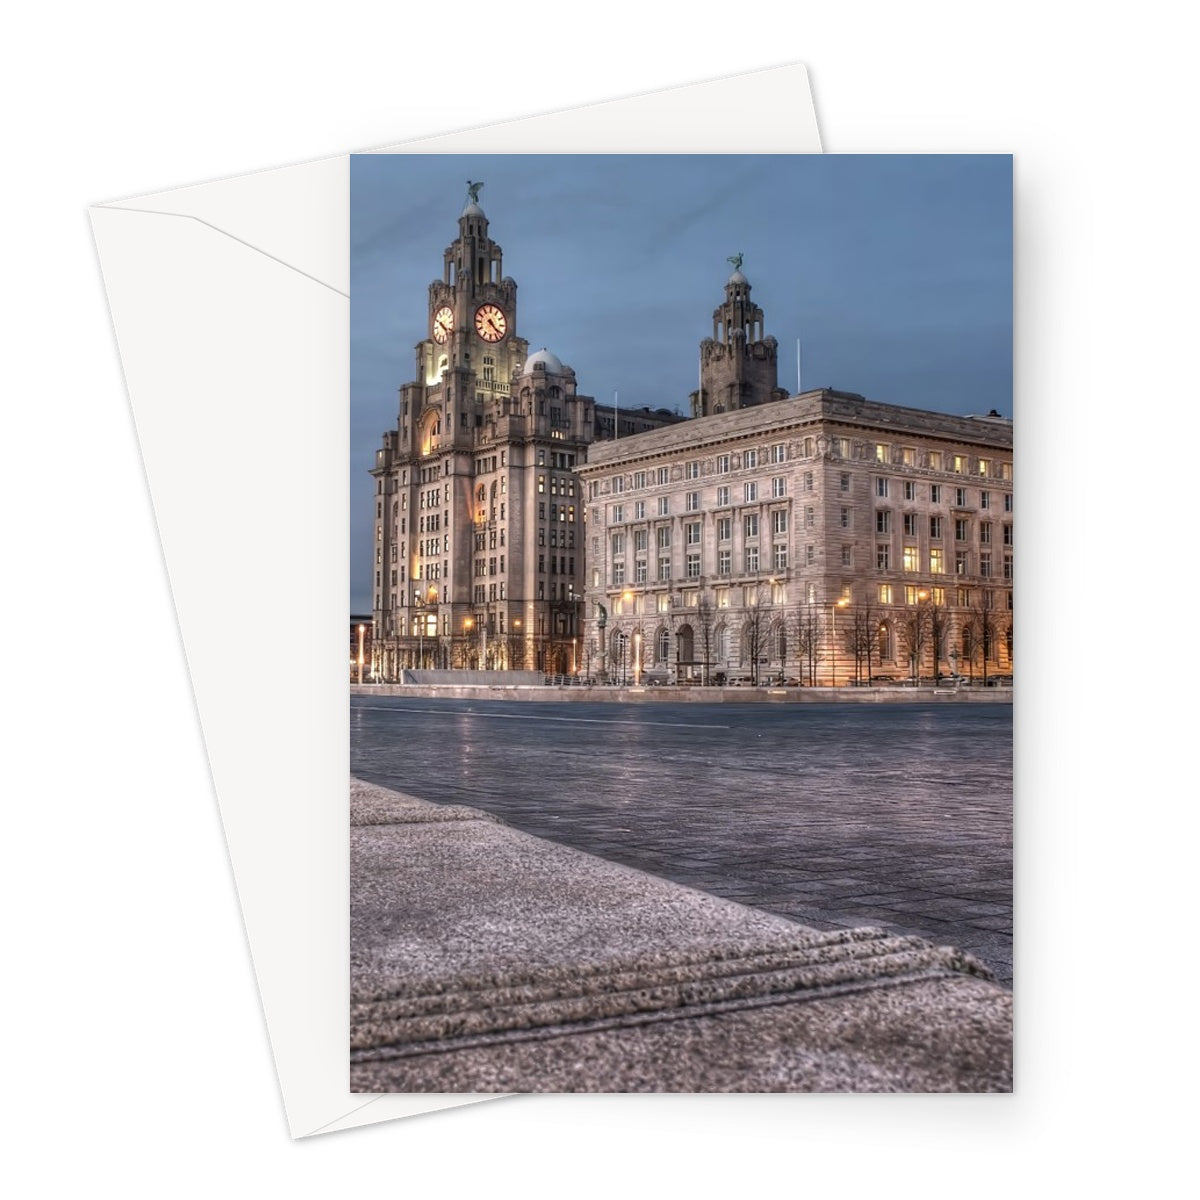 The Liver Buildings: A Liverpool Icon at Twilight Greeting Card